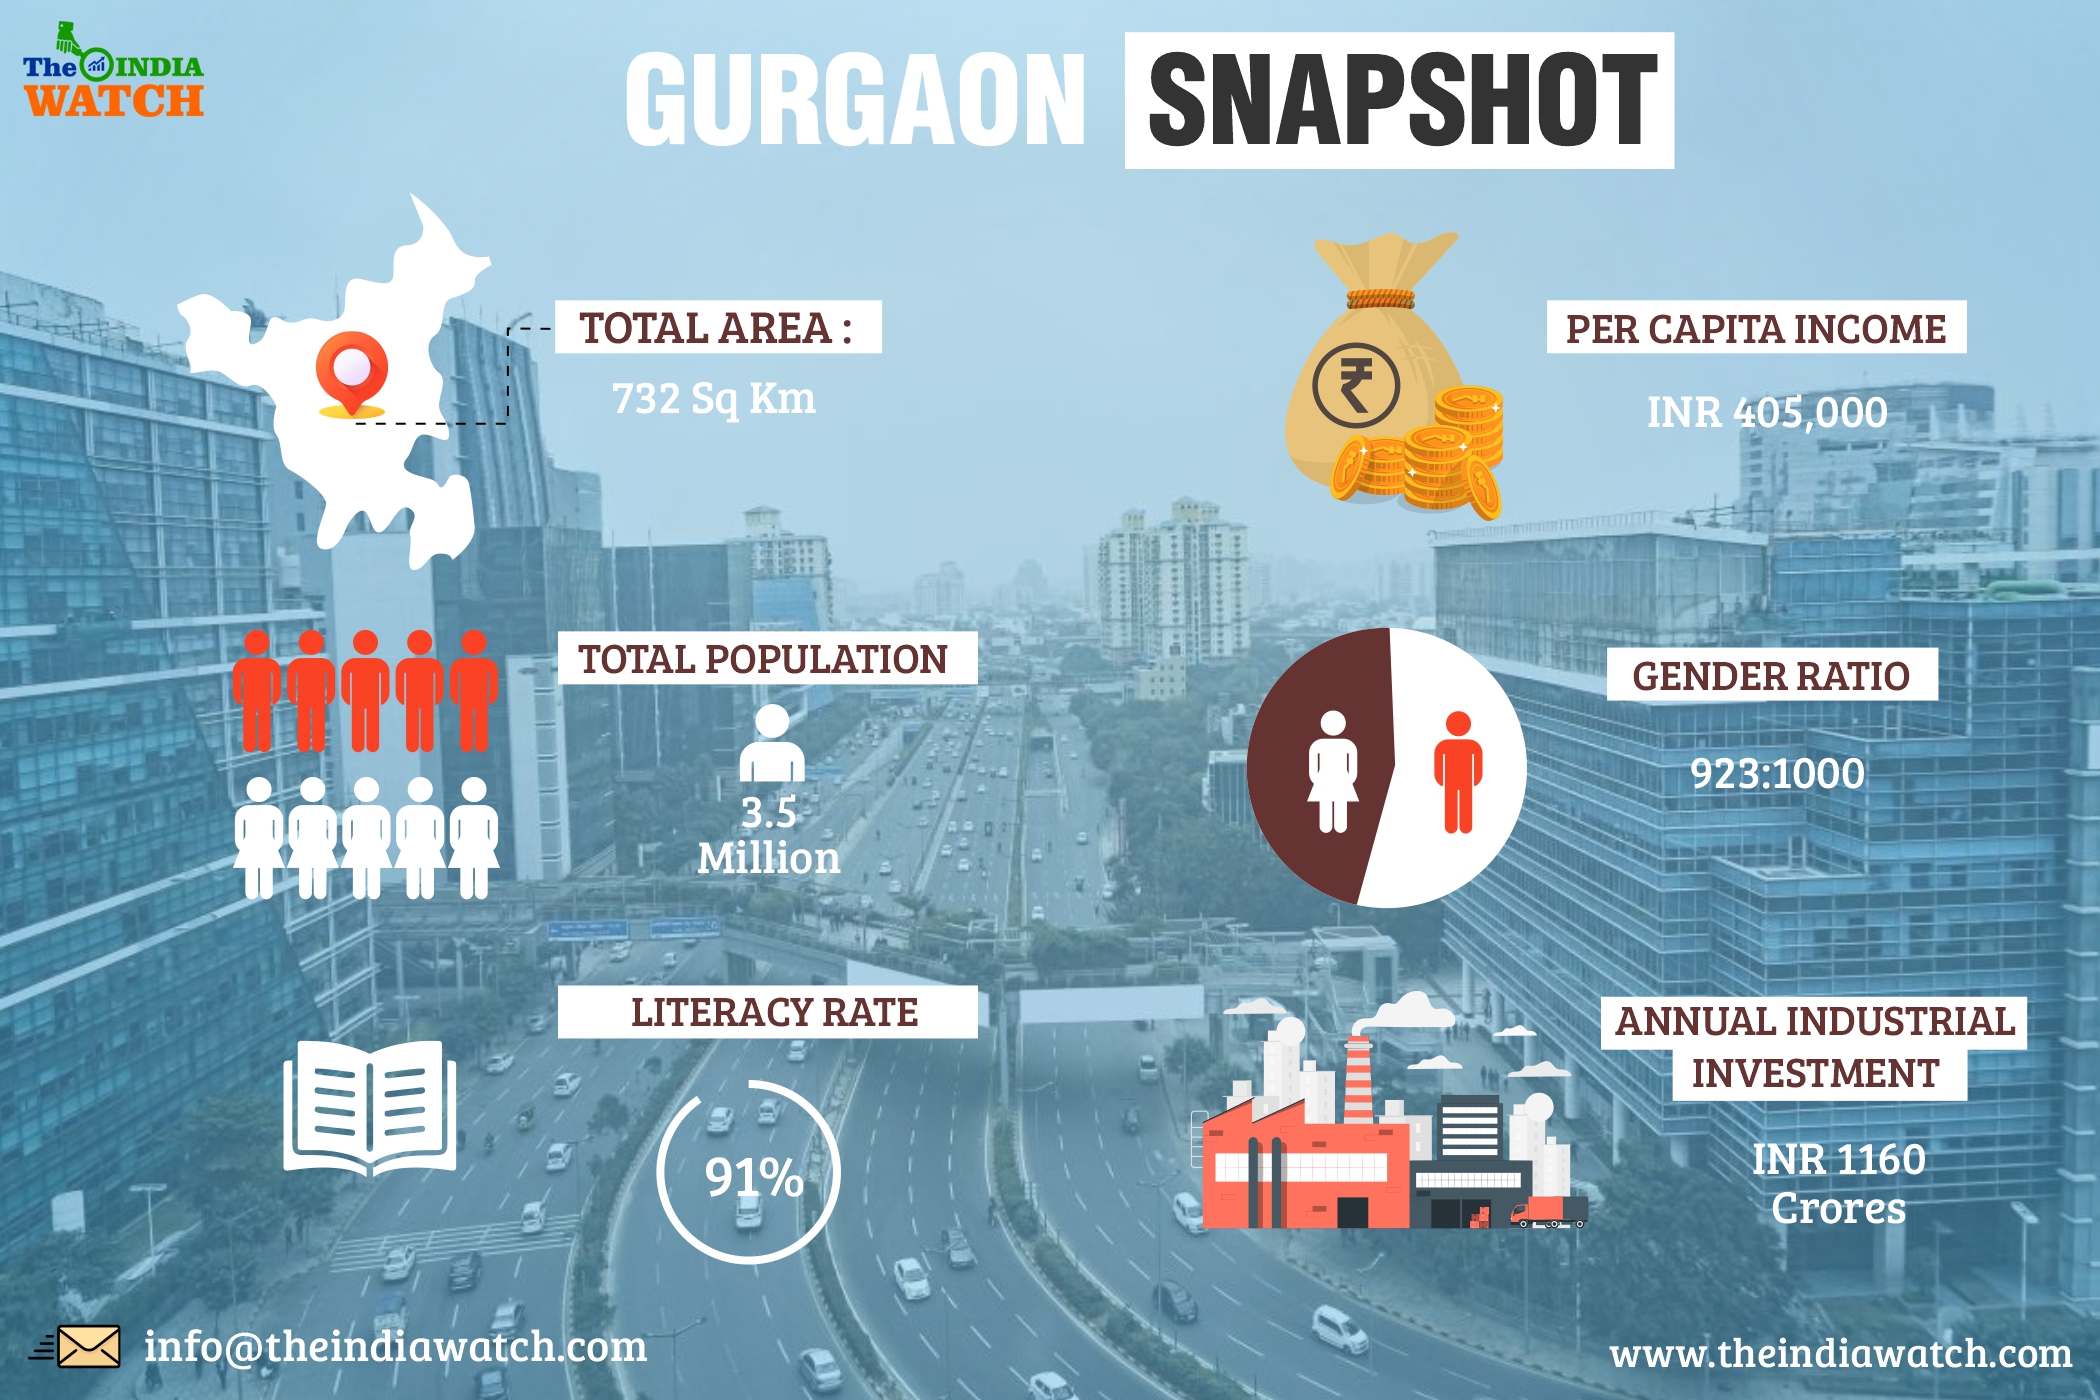 Why is the Millennium City Gurgaon an Ideal Place to start your Business?